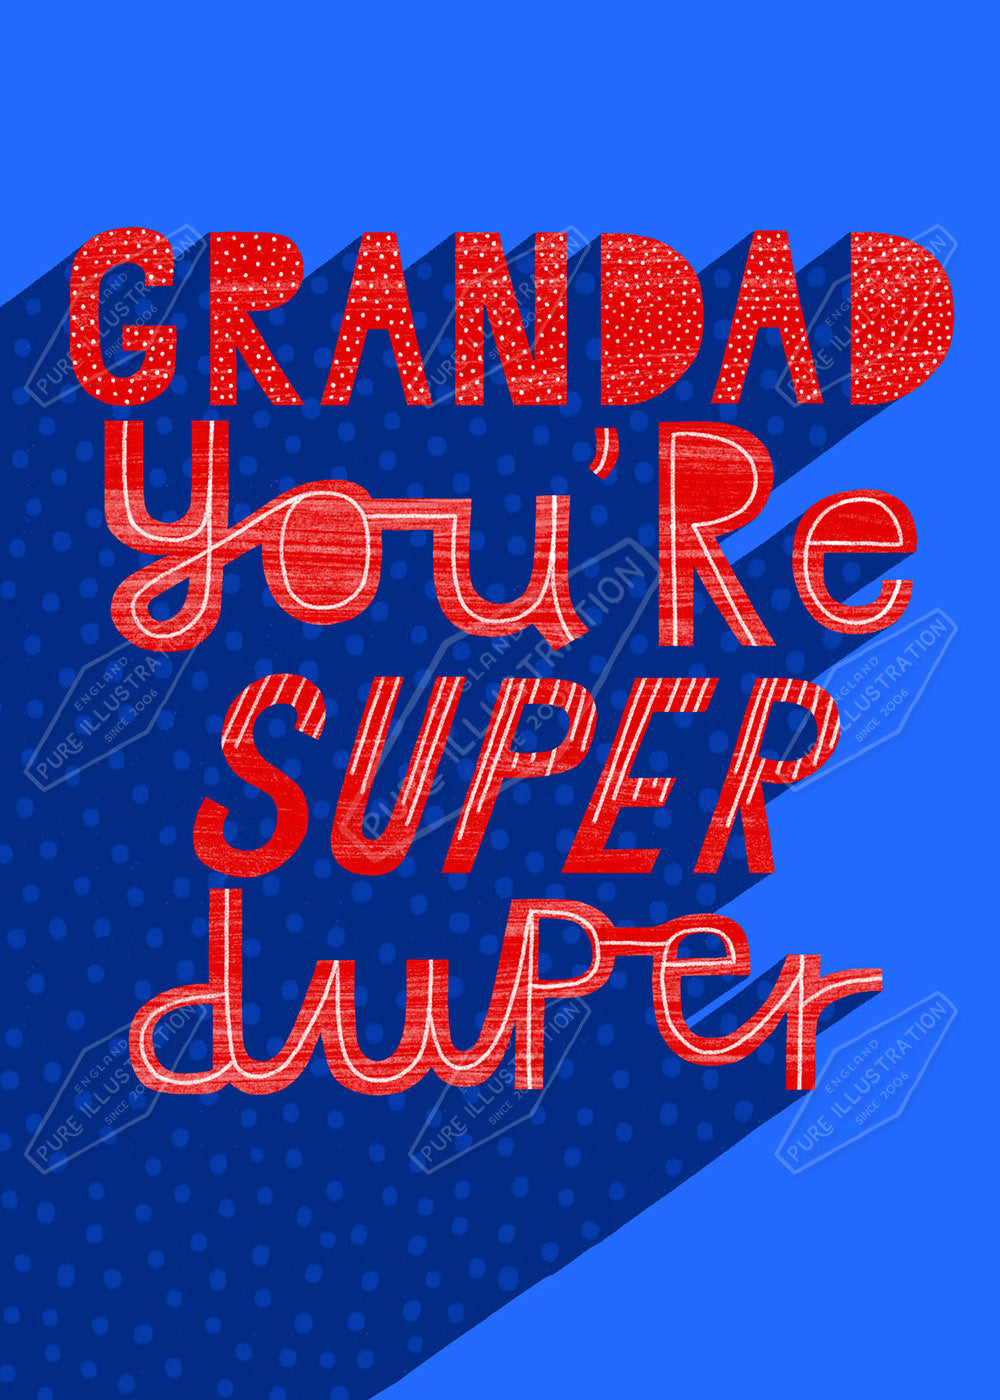 Grandad Birthday / Father's Day Retro Text Greeting Card Design - by Leah Brideaux - Pure Art Licensing Agency & Surface Design Studio